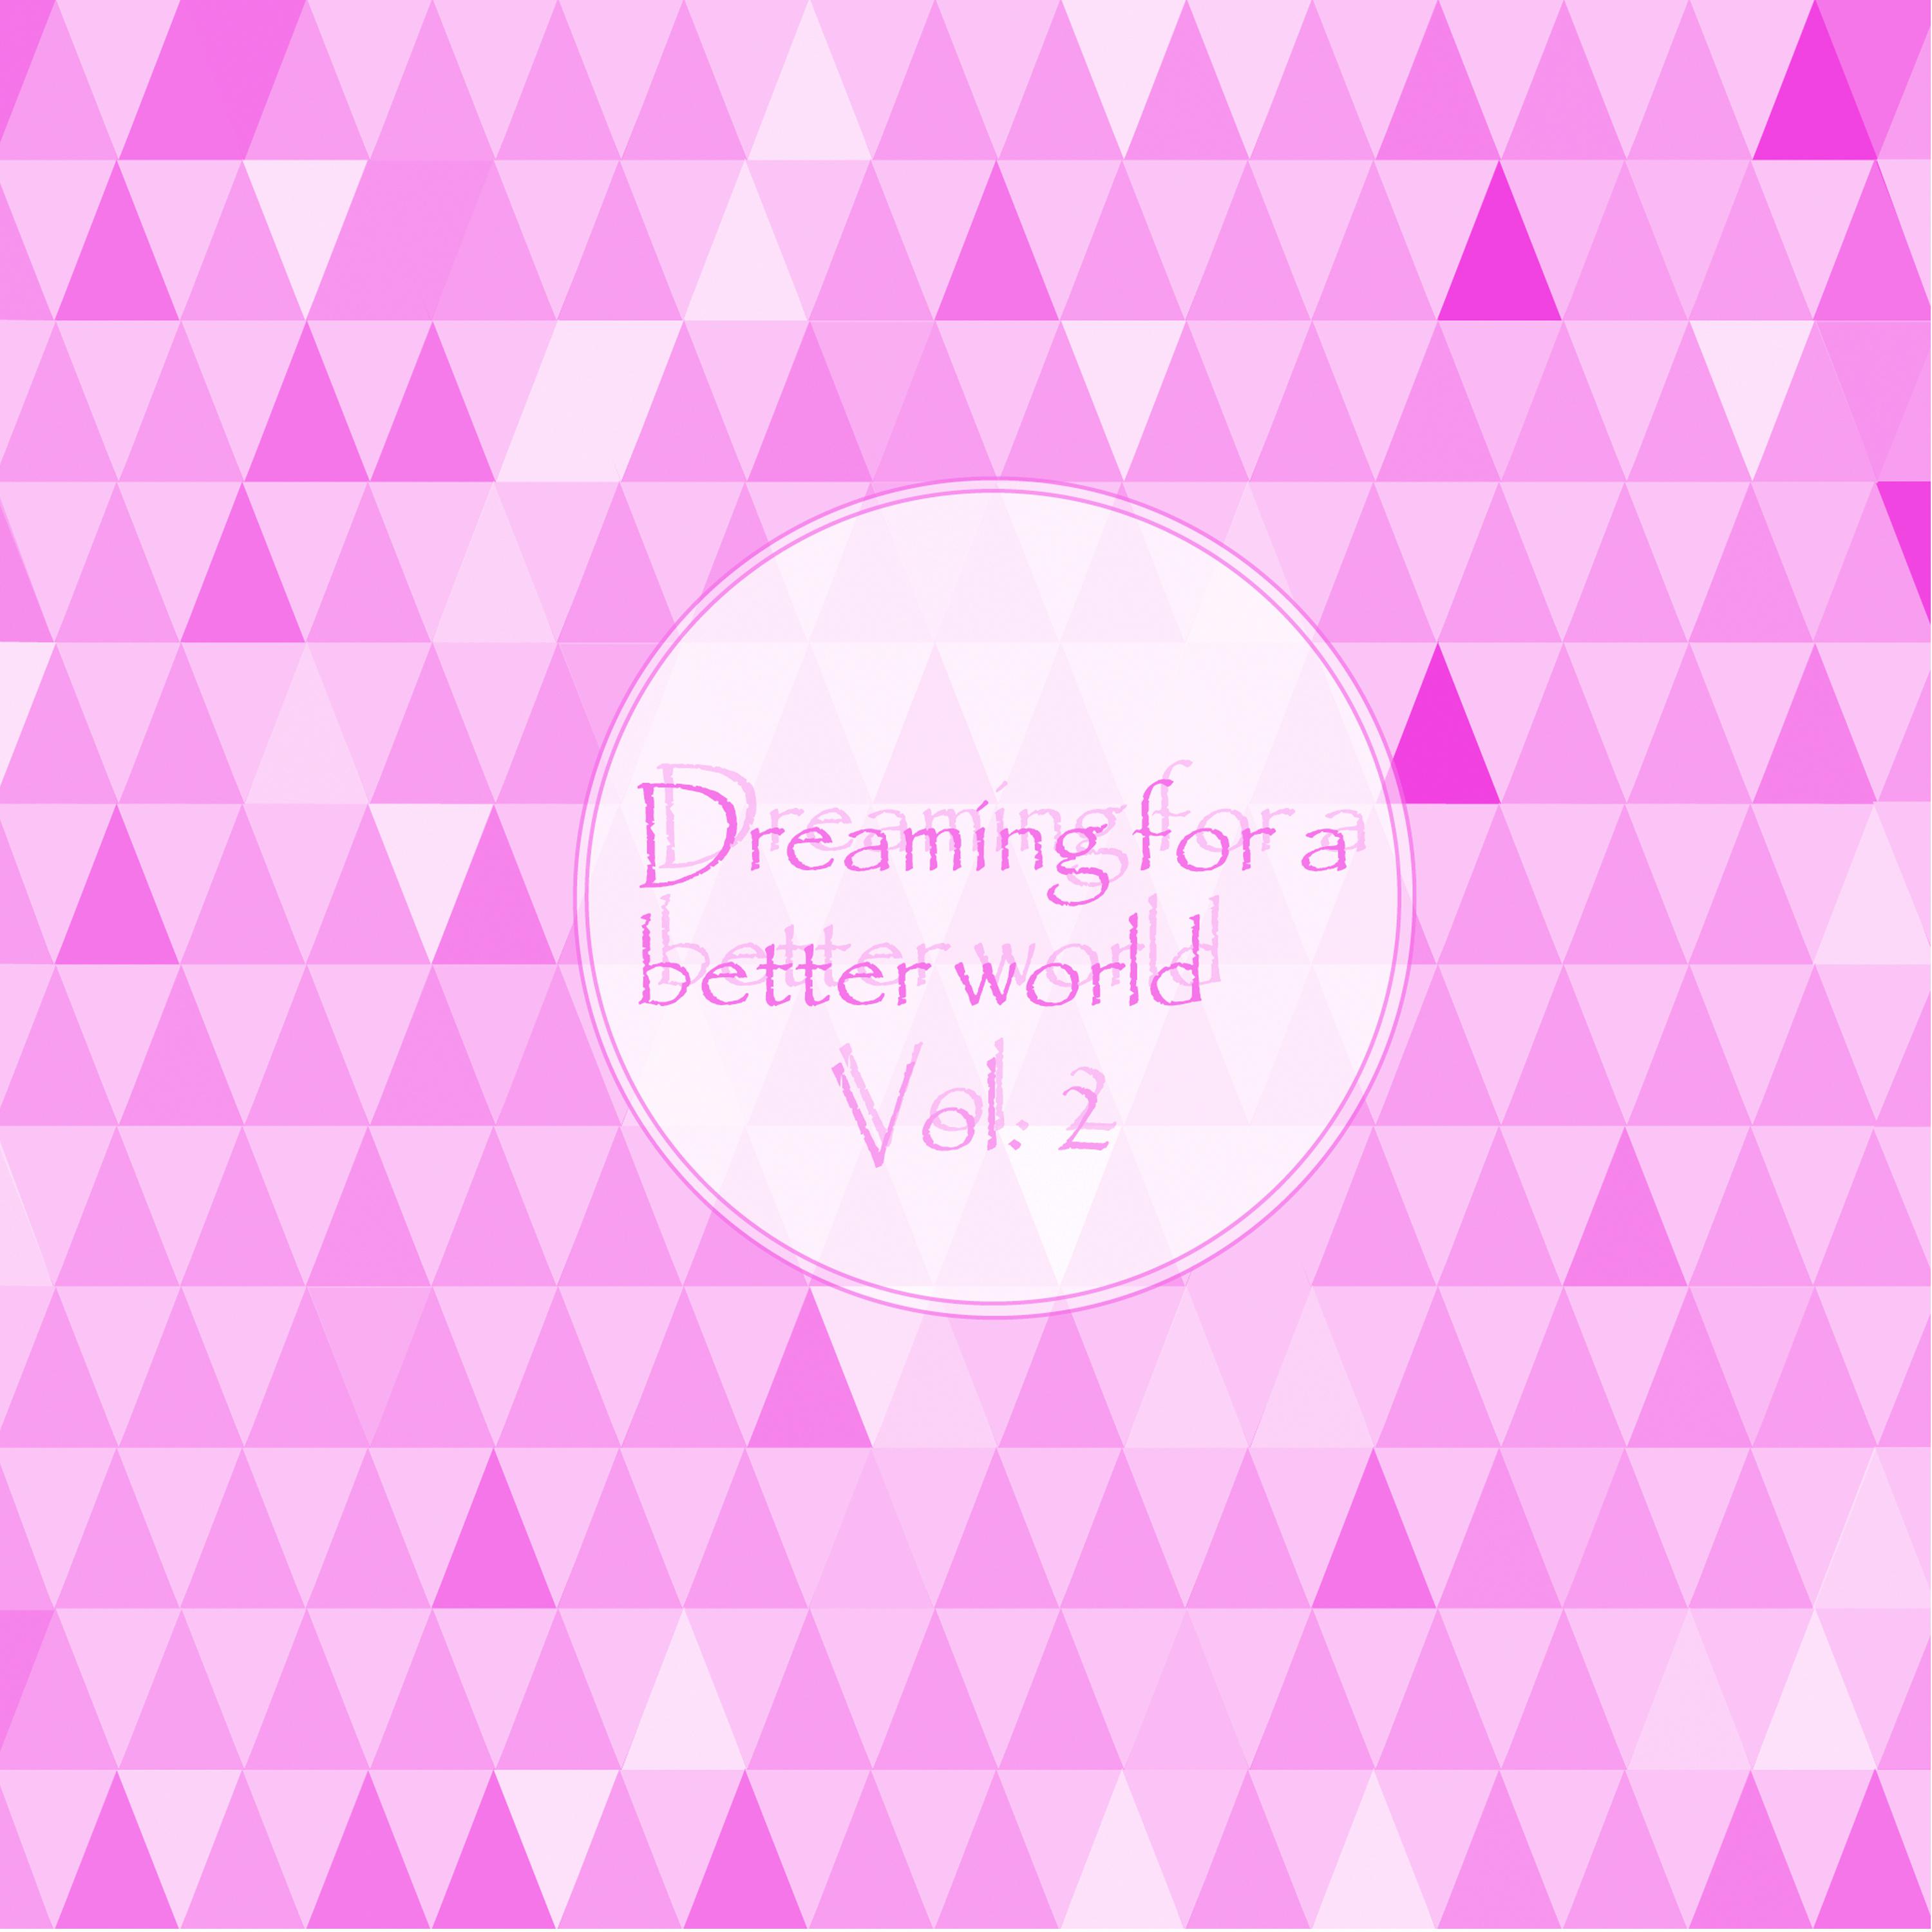 Dreaming for a Better World, Vol. 2